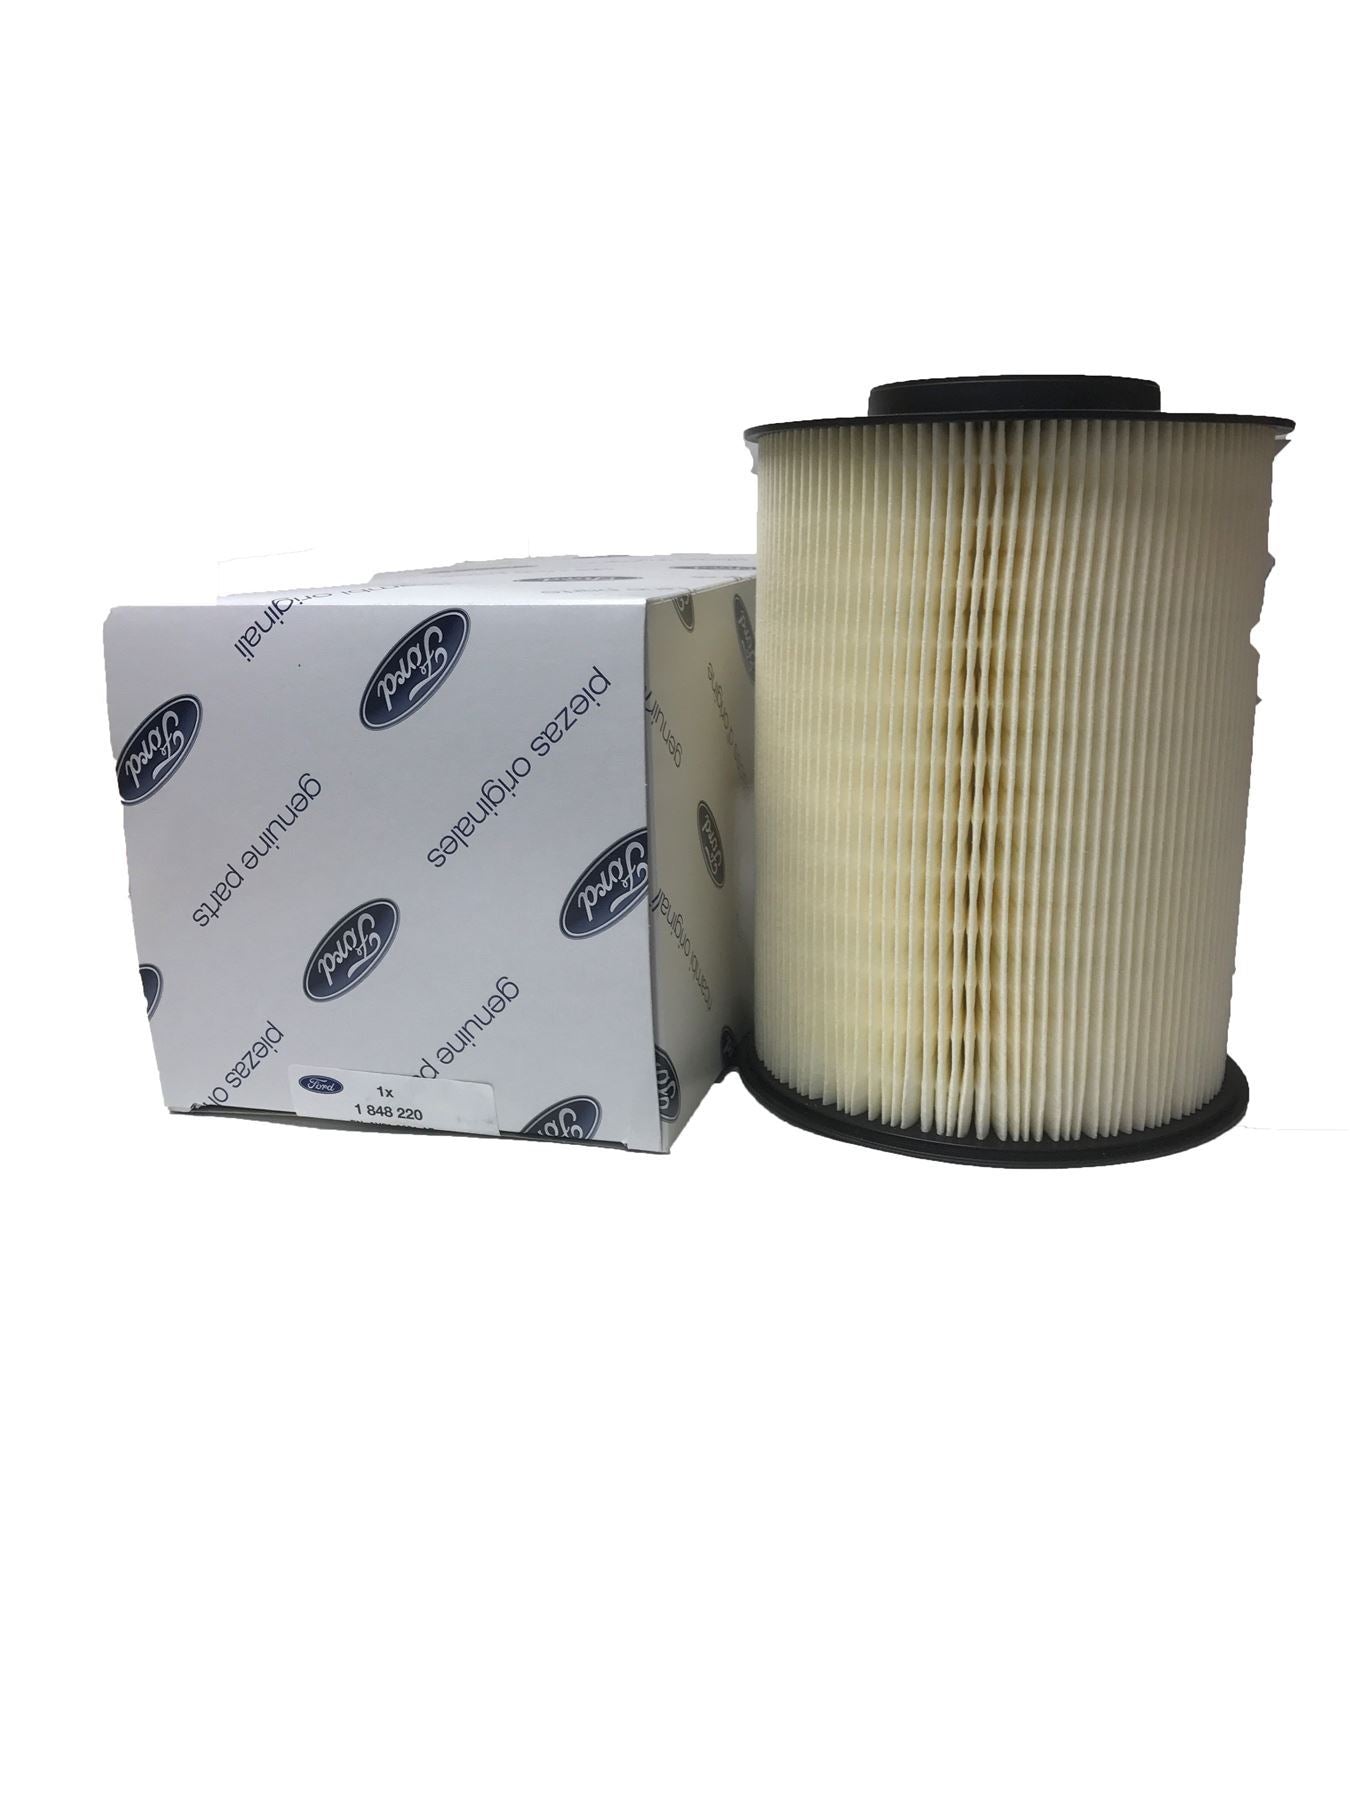 GENUINE FORD FOCUS III Saloon 1.6 Ti 08.11- 85HP ROUND TYPE AIR FILTER 1848220